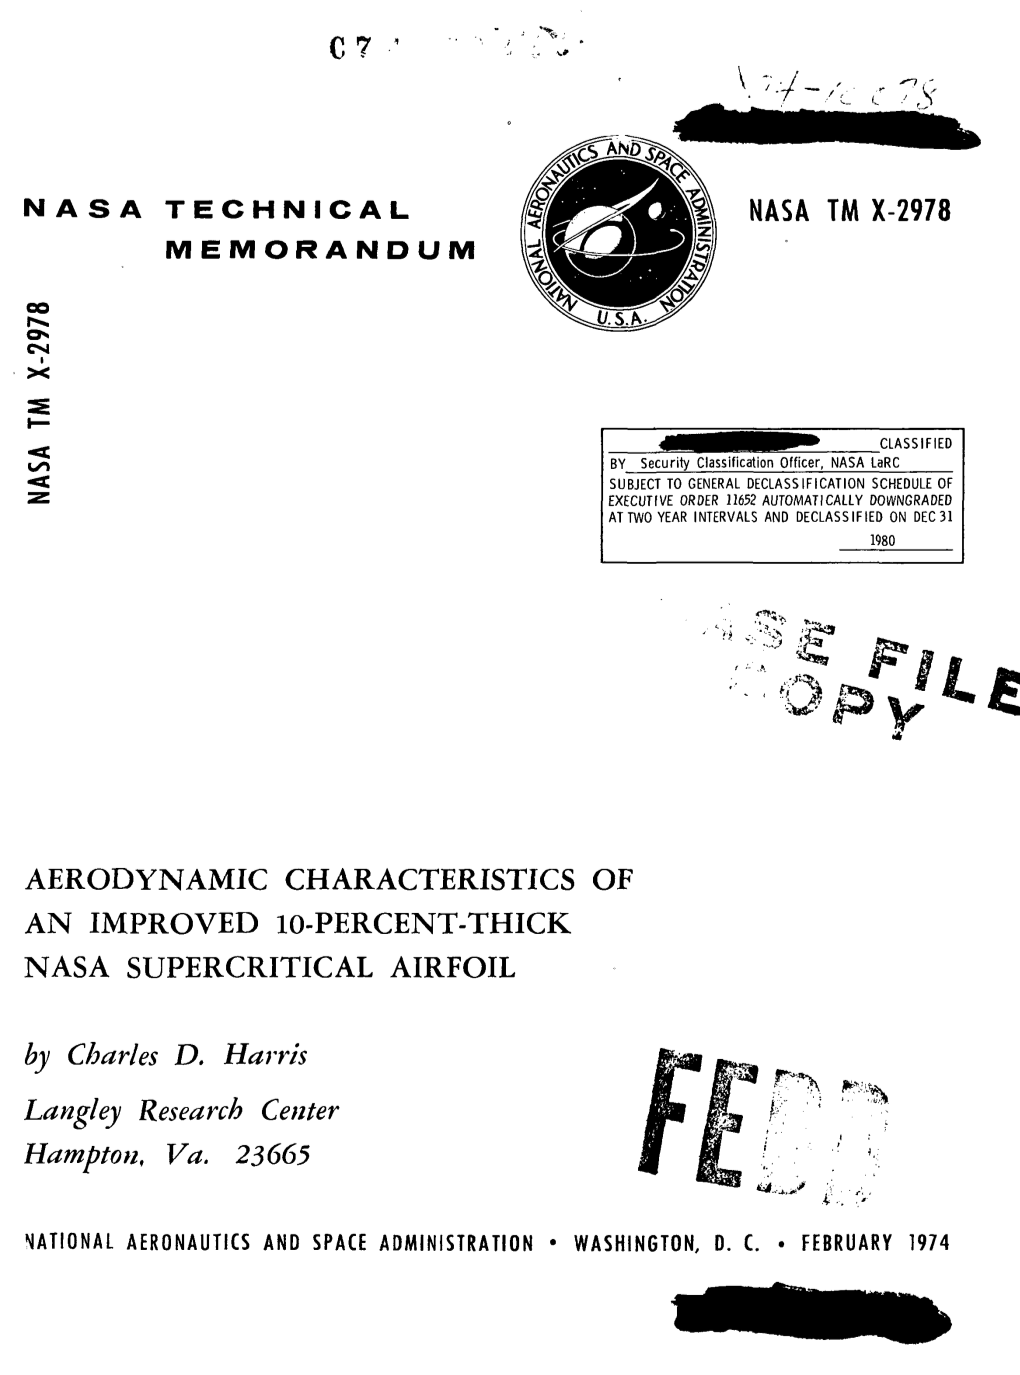 AERODYNAMIC CHARACTERISTICS of an IMPROVED 10-PERCENT-THICK NASA SUPERCRITICAL AIRFOIL by Charles D. Harris Langley Research Center Hampton, Va